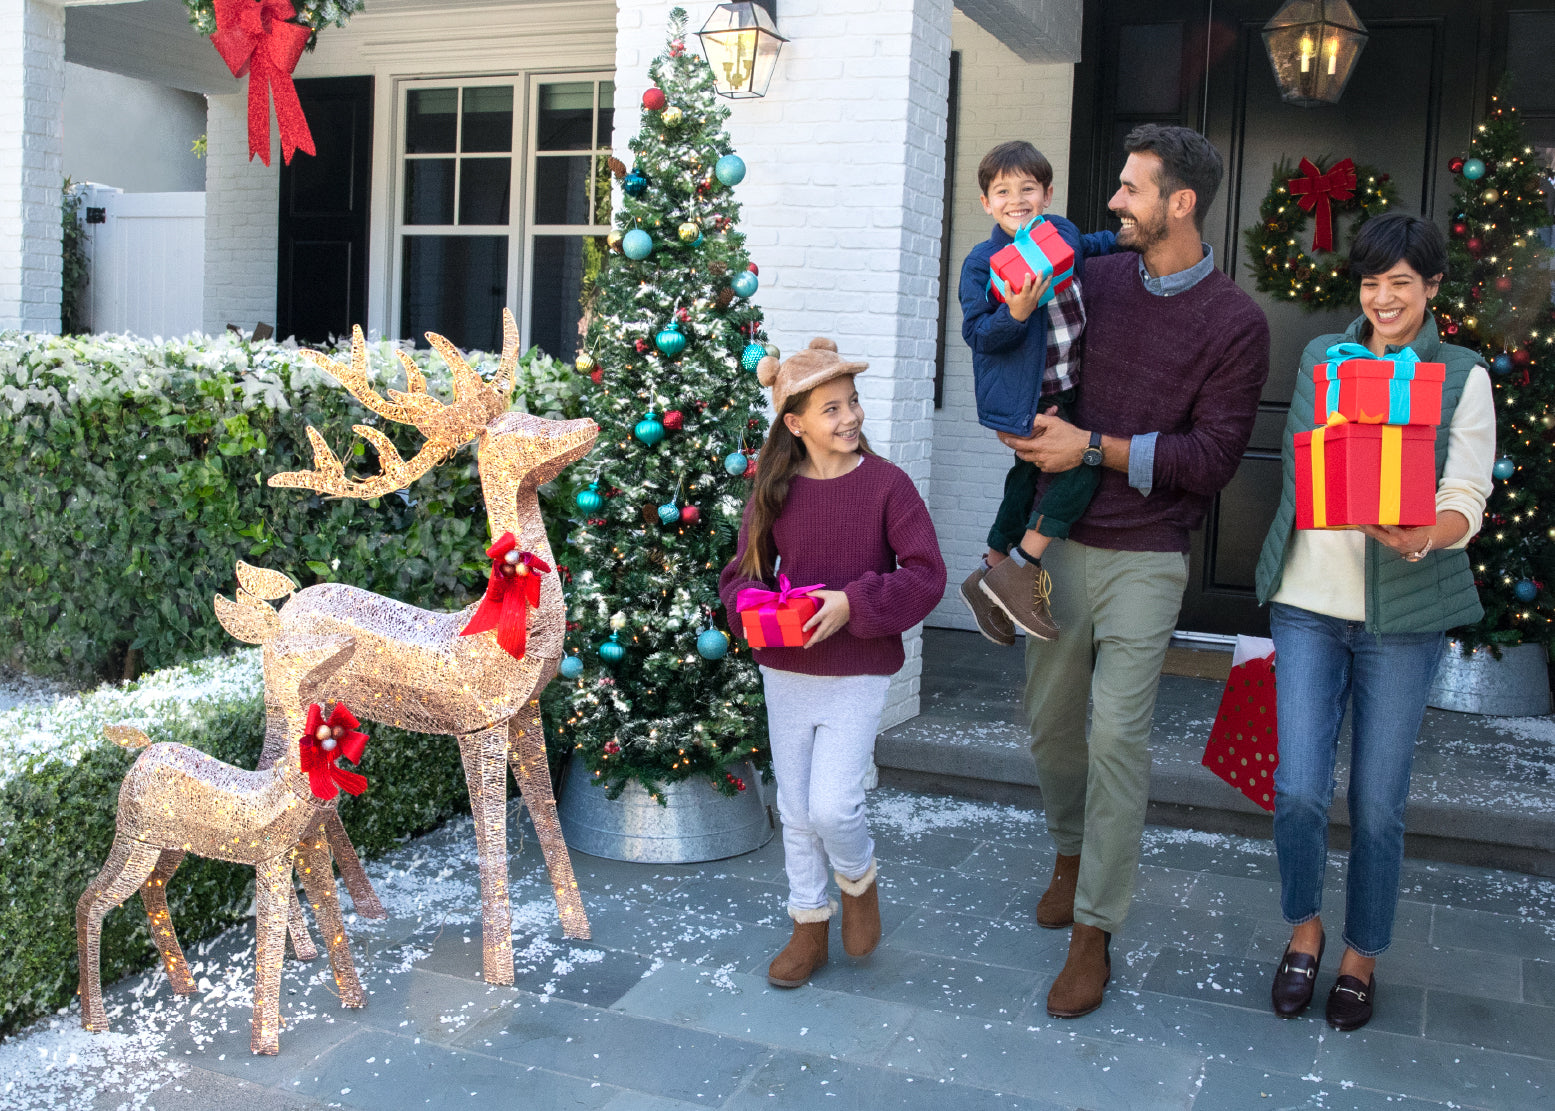 A family walking outside of their house carrying presents. There is a mom, dad, a pre-teen girl and a young boy. Two standing reindeer decorations are on the path.